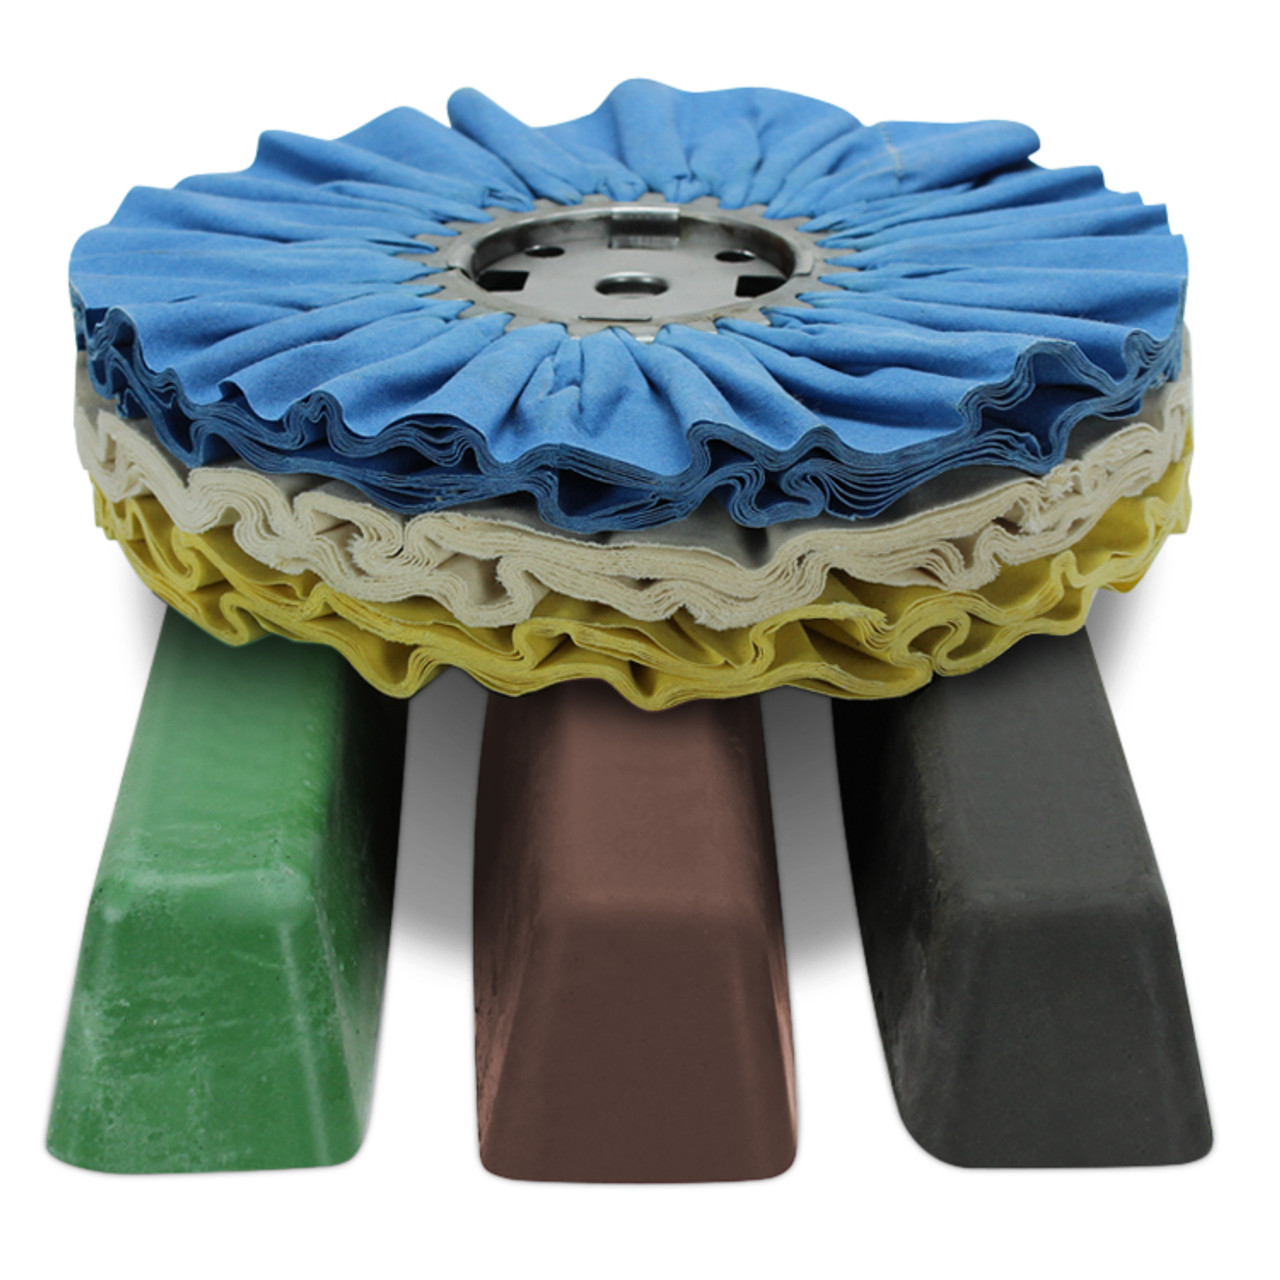 Assorted Color Metal Polishing Compound for Buffing Wheels